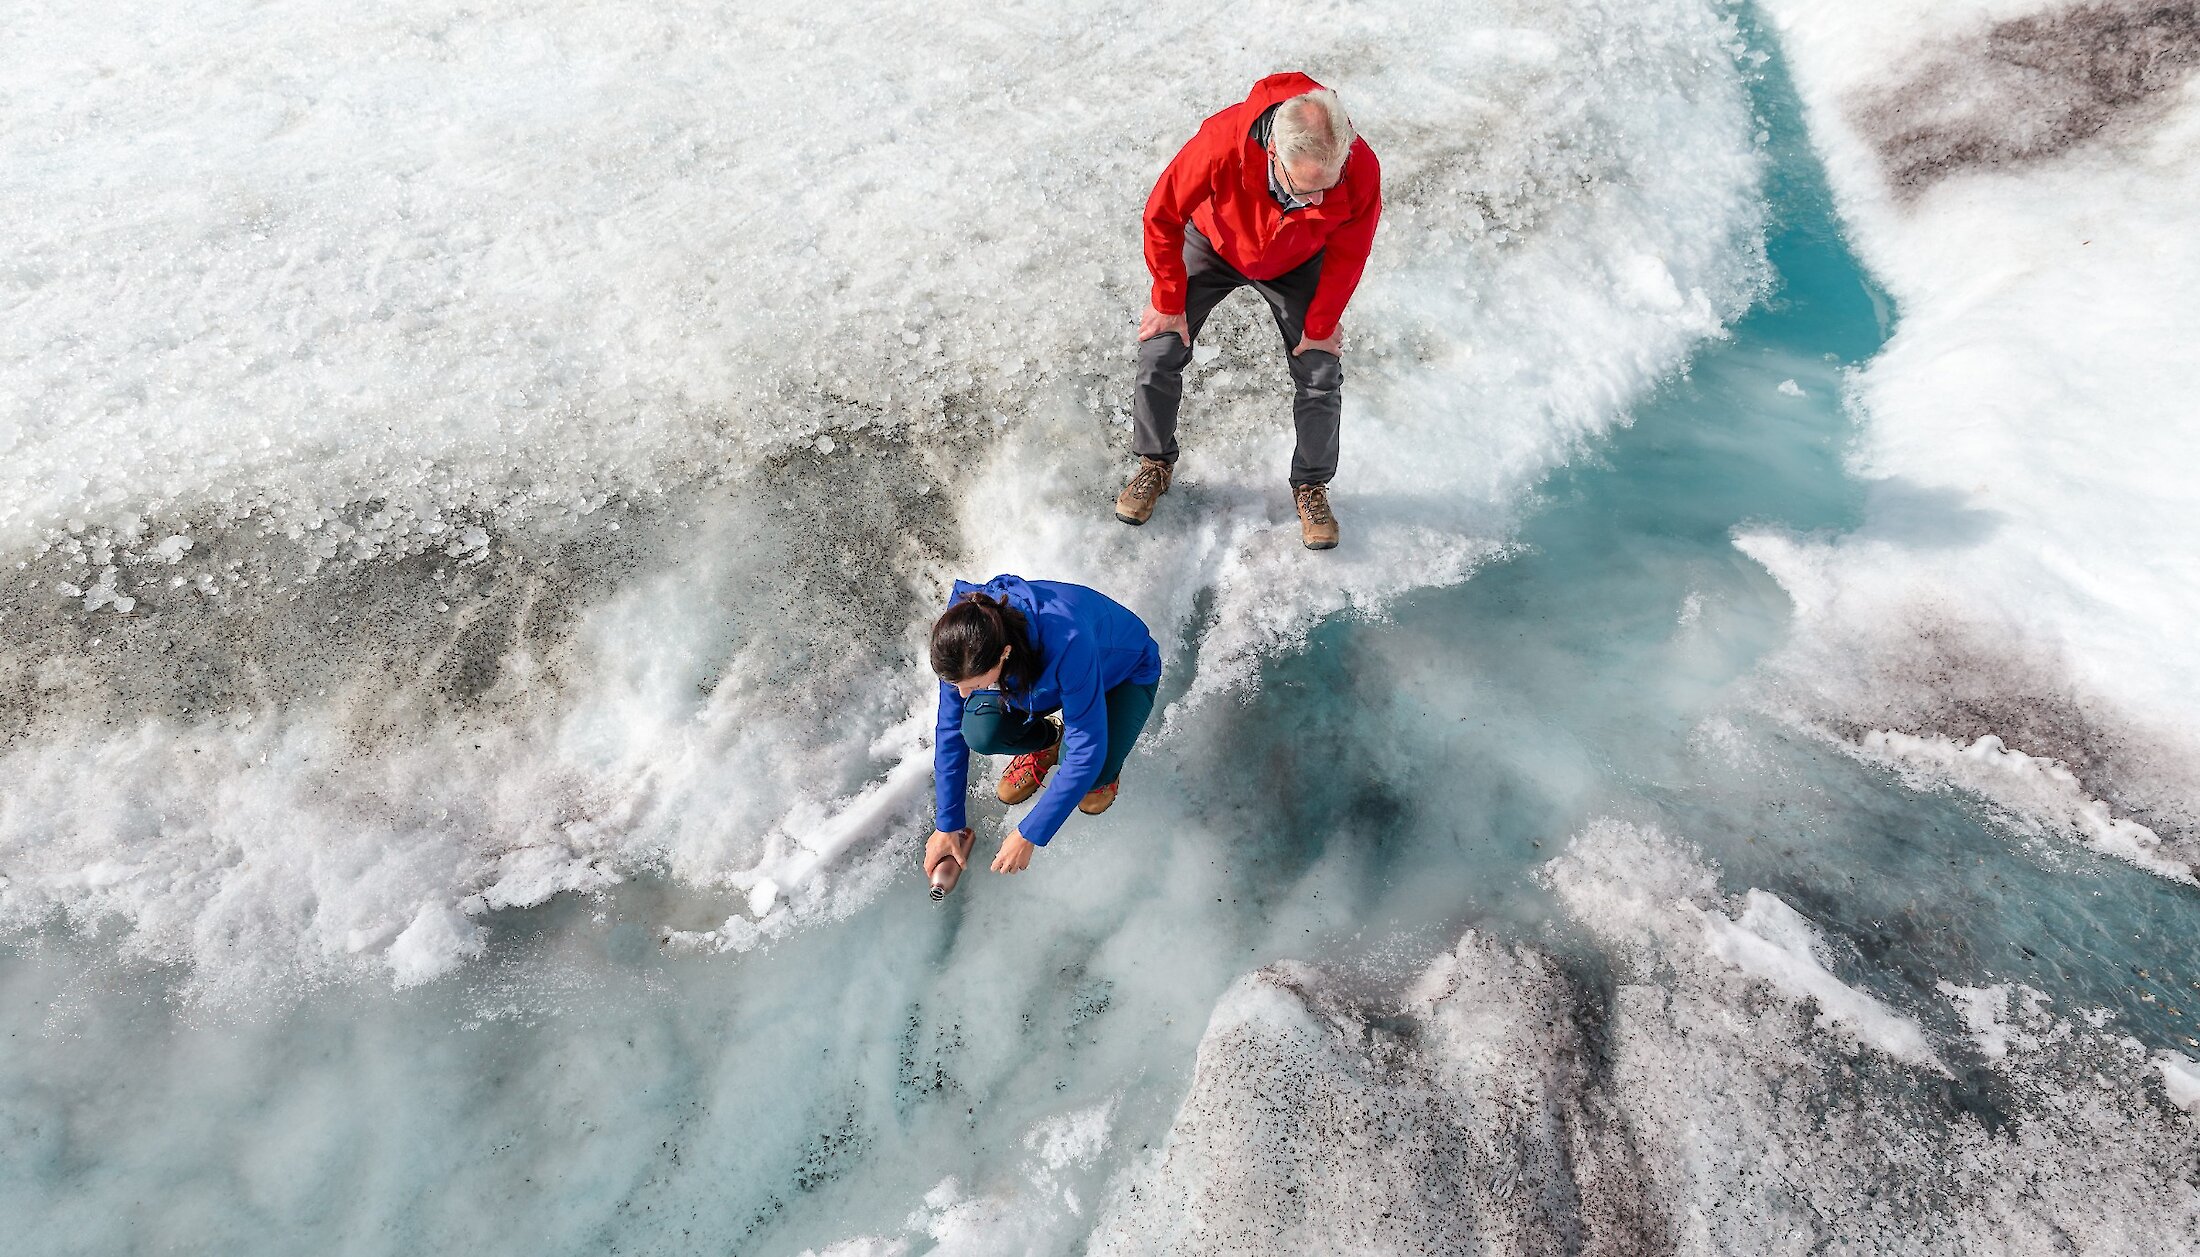 Getting fresh water right from the glacier at the Columbia Icefield